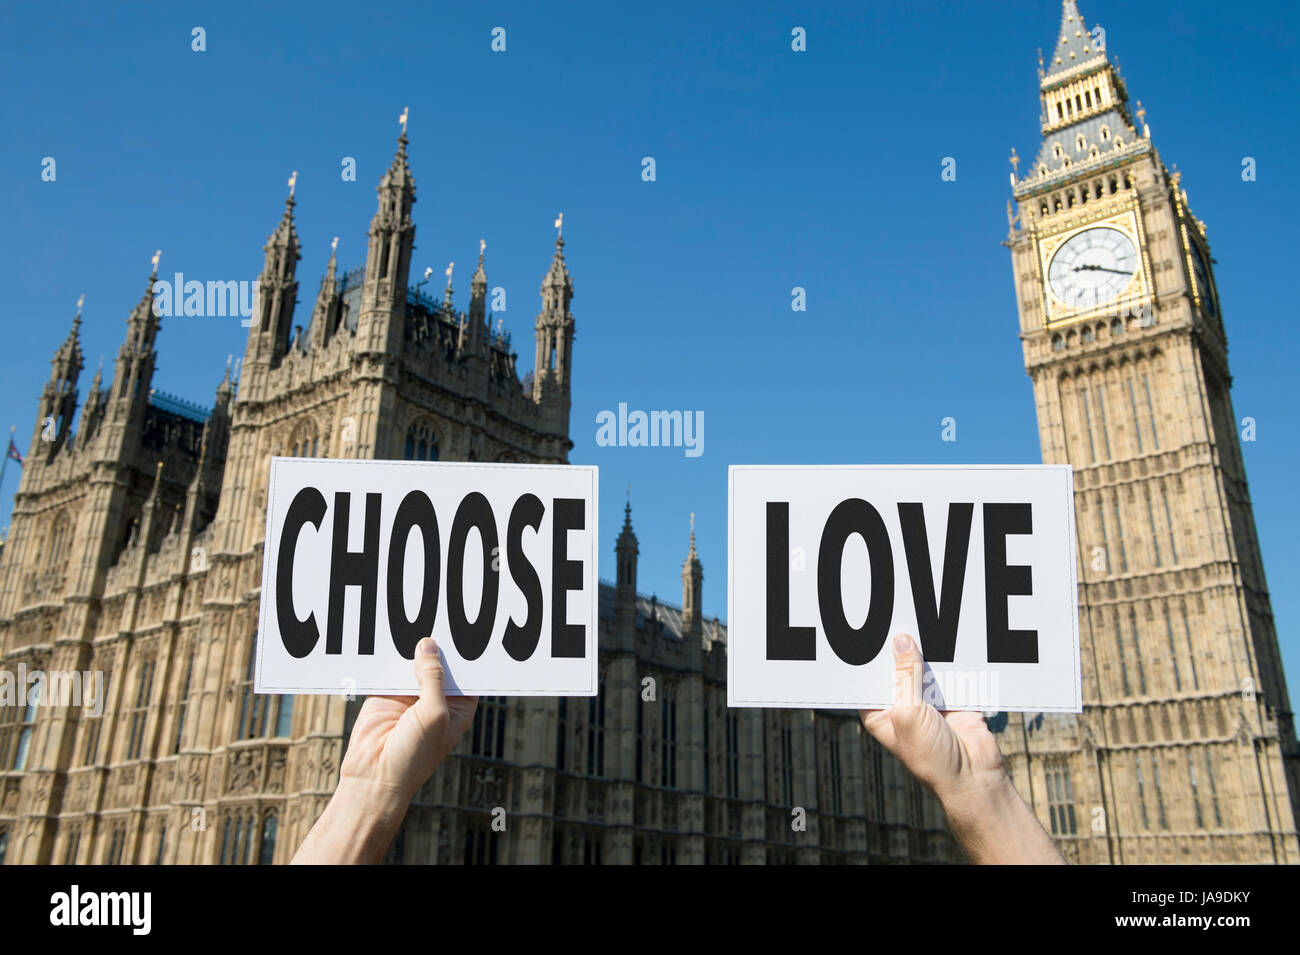 Hands holding up political signboards with the message Choose Love in front of Houses of Parliament at Westminster Palace in London, UK Stock Photo